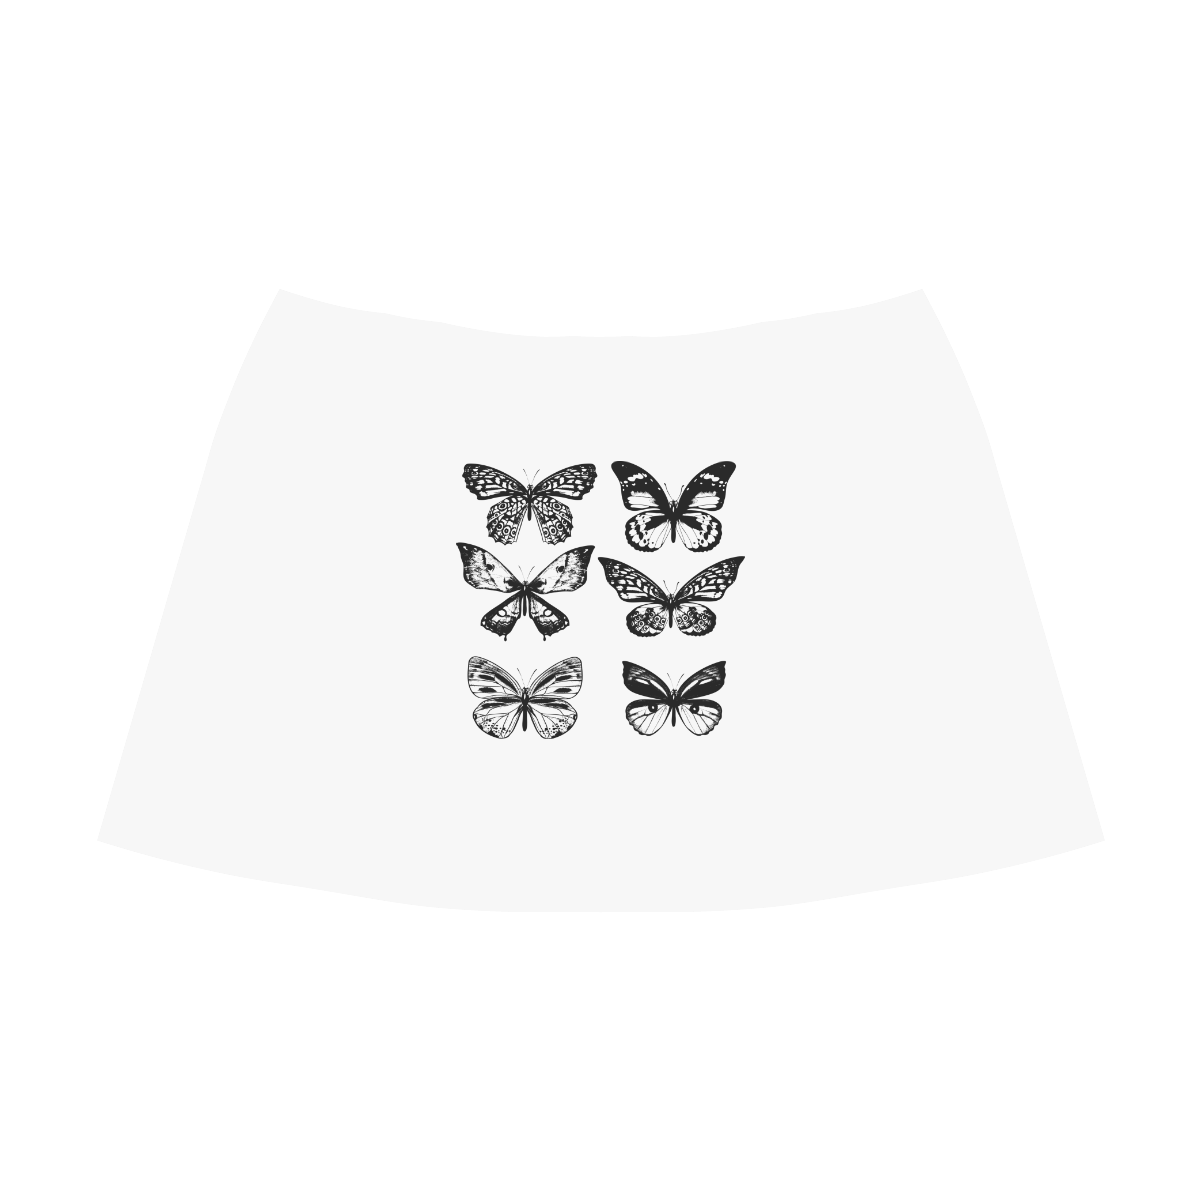 Long Skirts DESIGNERS EDITION : Black and White artistic series with Butterflies. 2016 BLACK WHITE E Mnemosyne Women's Crepe Skirt (Model D16)